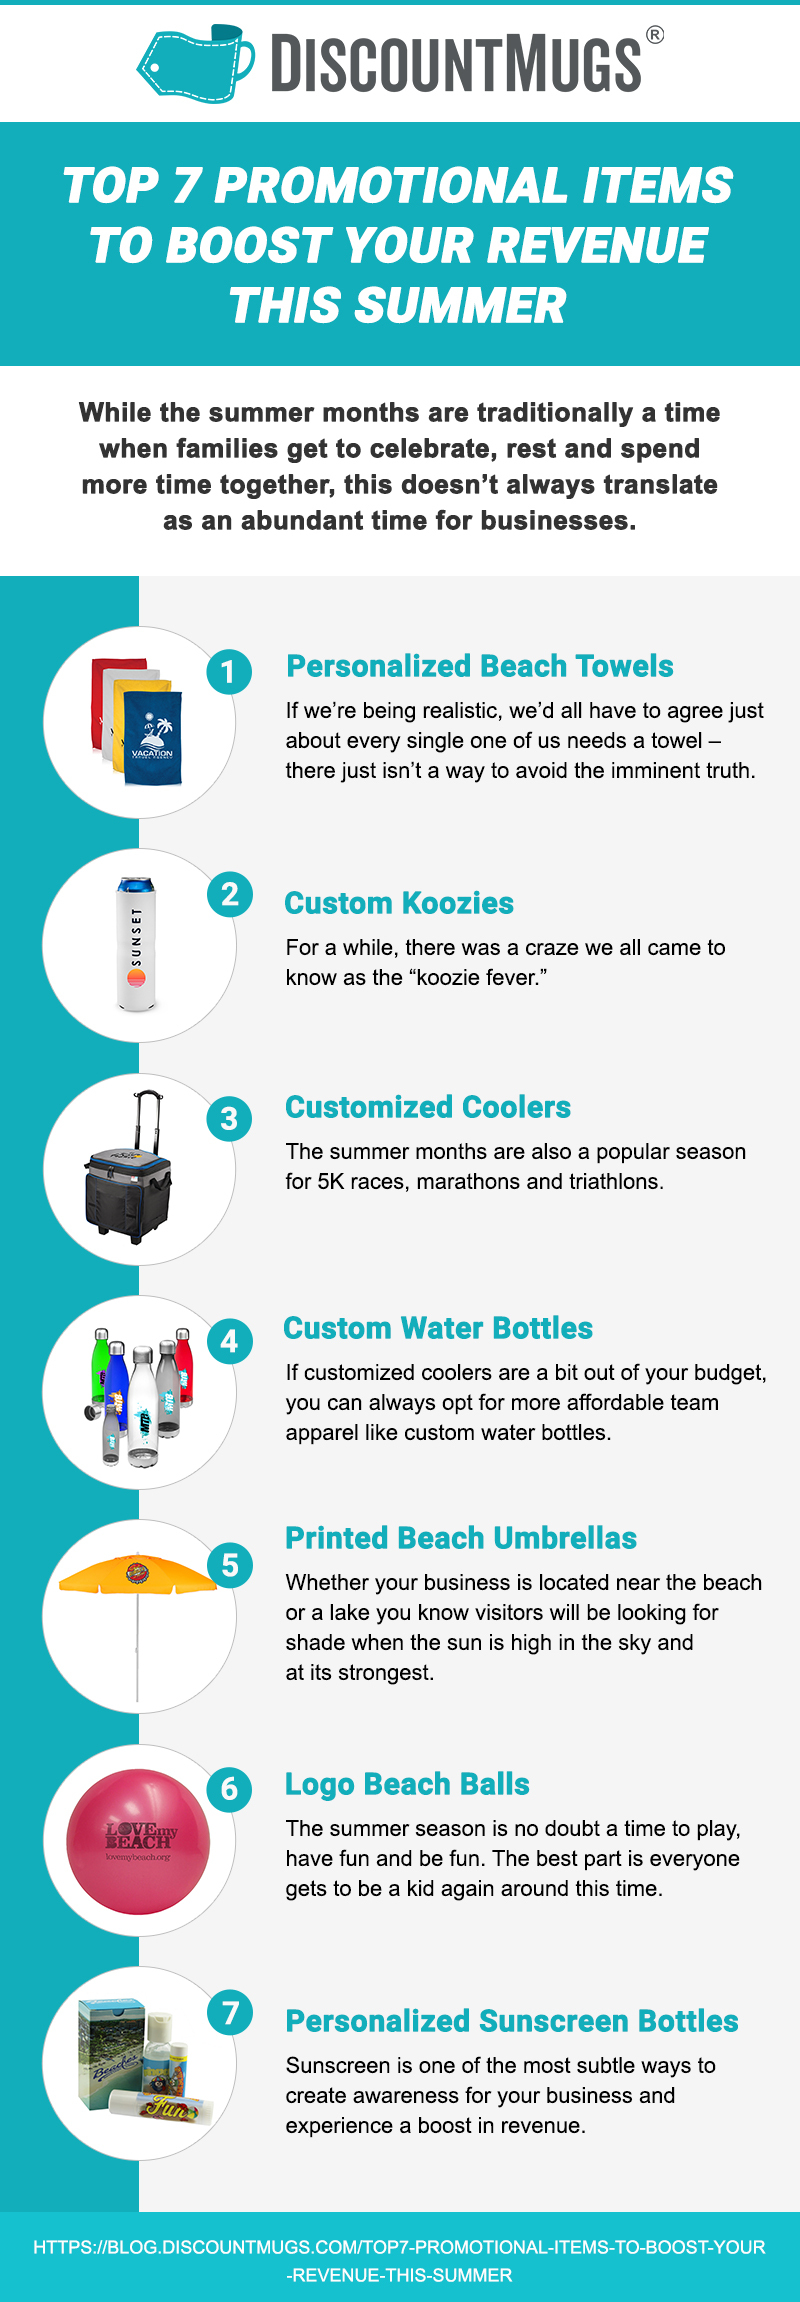 discountmug-infographic - top 7 promotional items to boost revenue summer